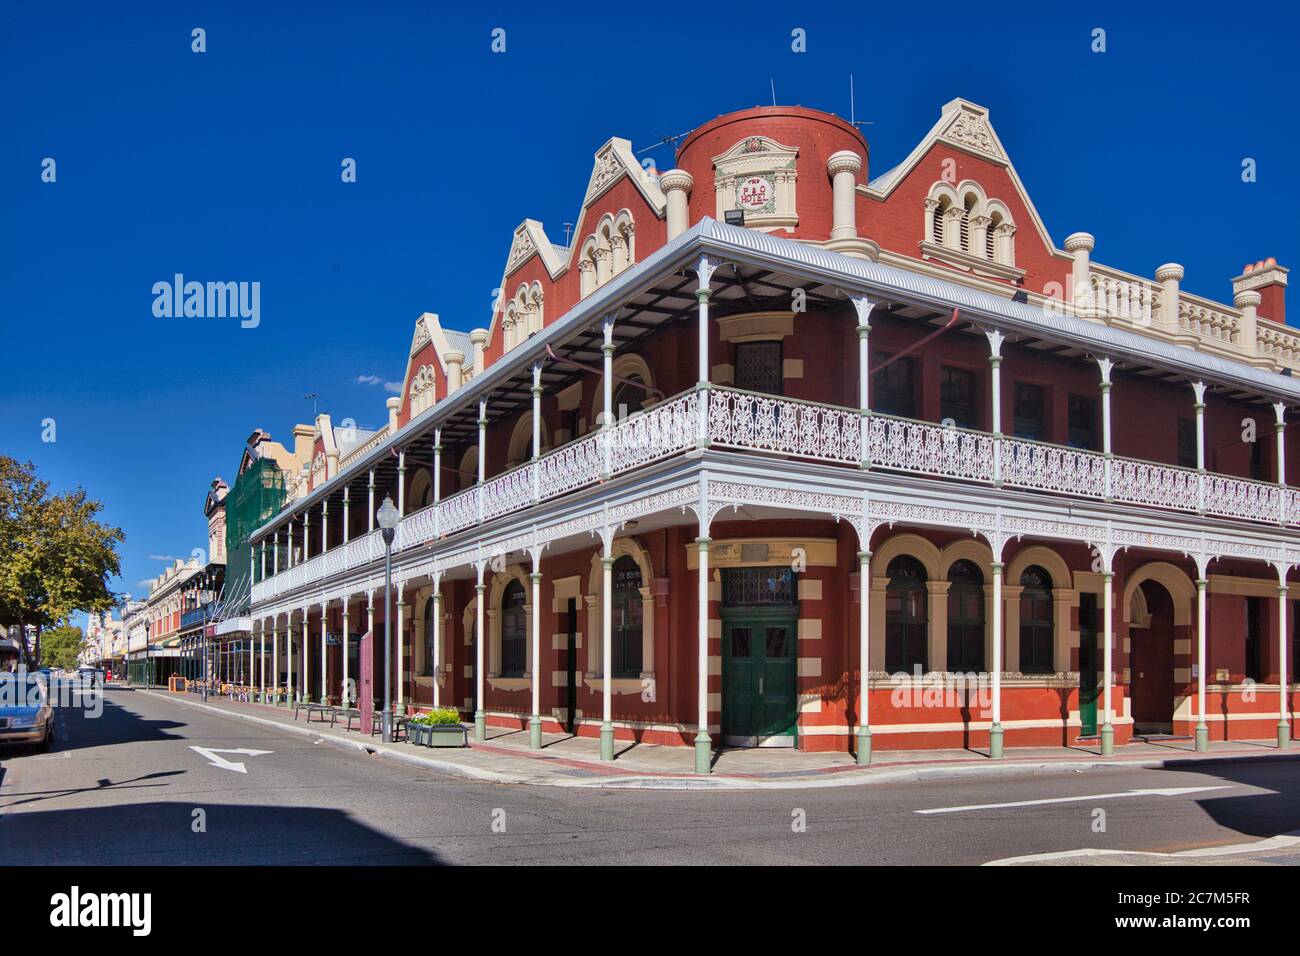 Typical older style buildings with arches and verandas with pretty wrought iron railings on a street in Fremantle, Western Australia. Stock Photo